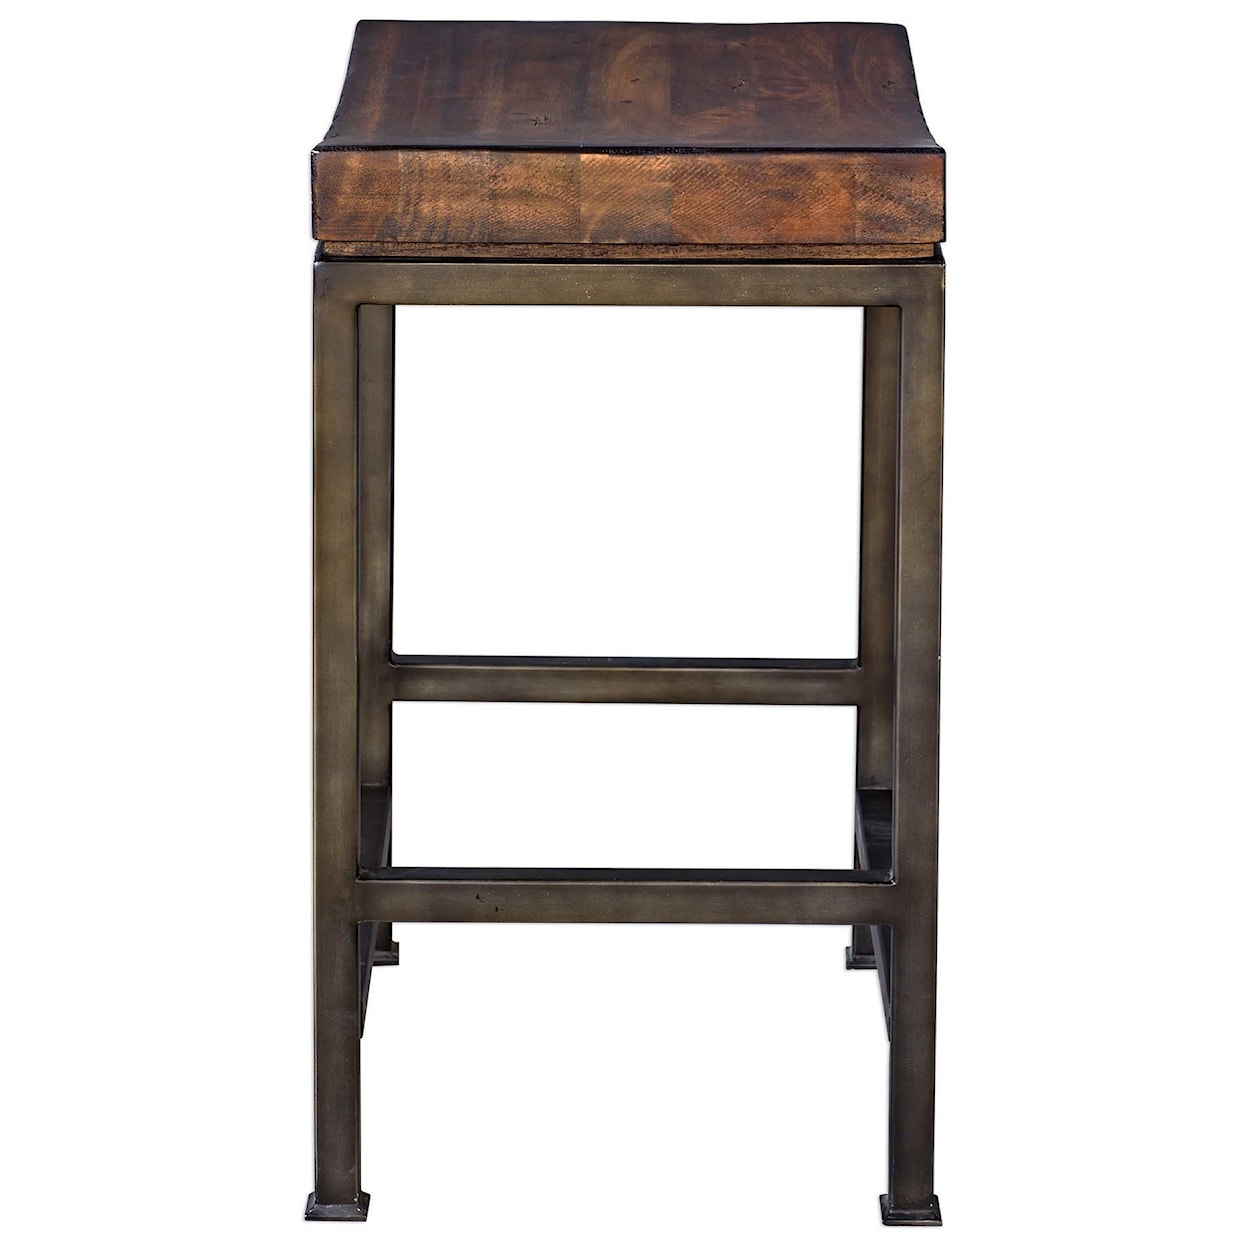 Uttermost Accent Furniture - Stools Beck Wood Counter Stool